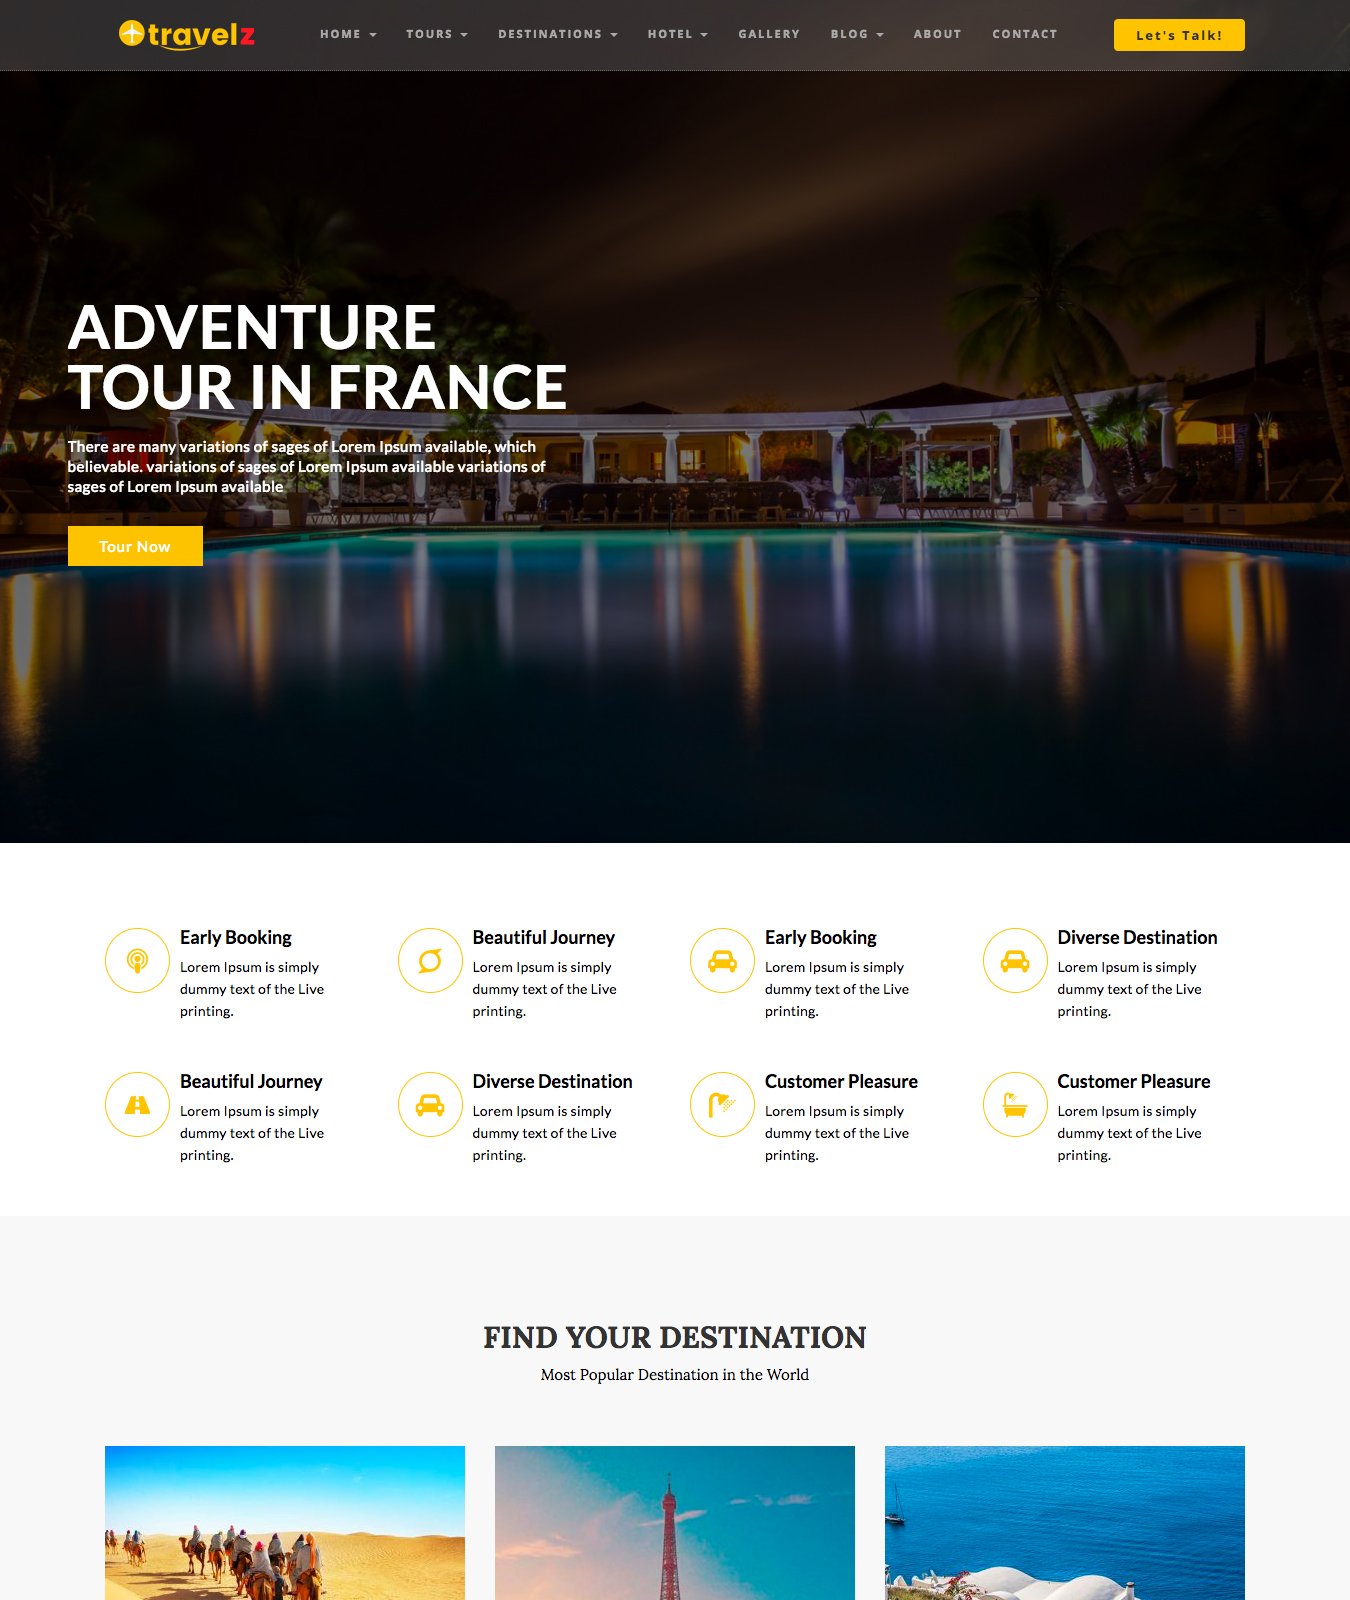 Travelz home page four